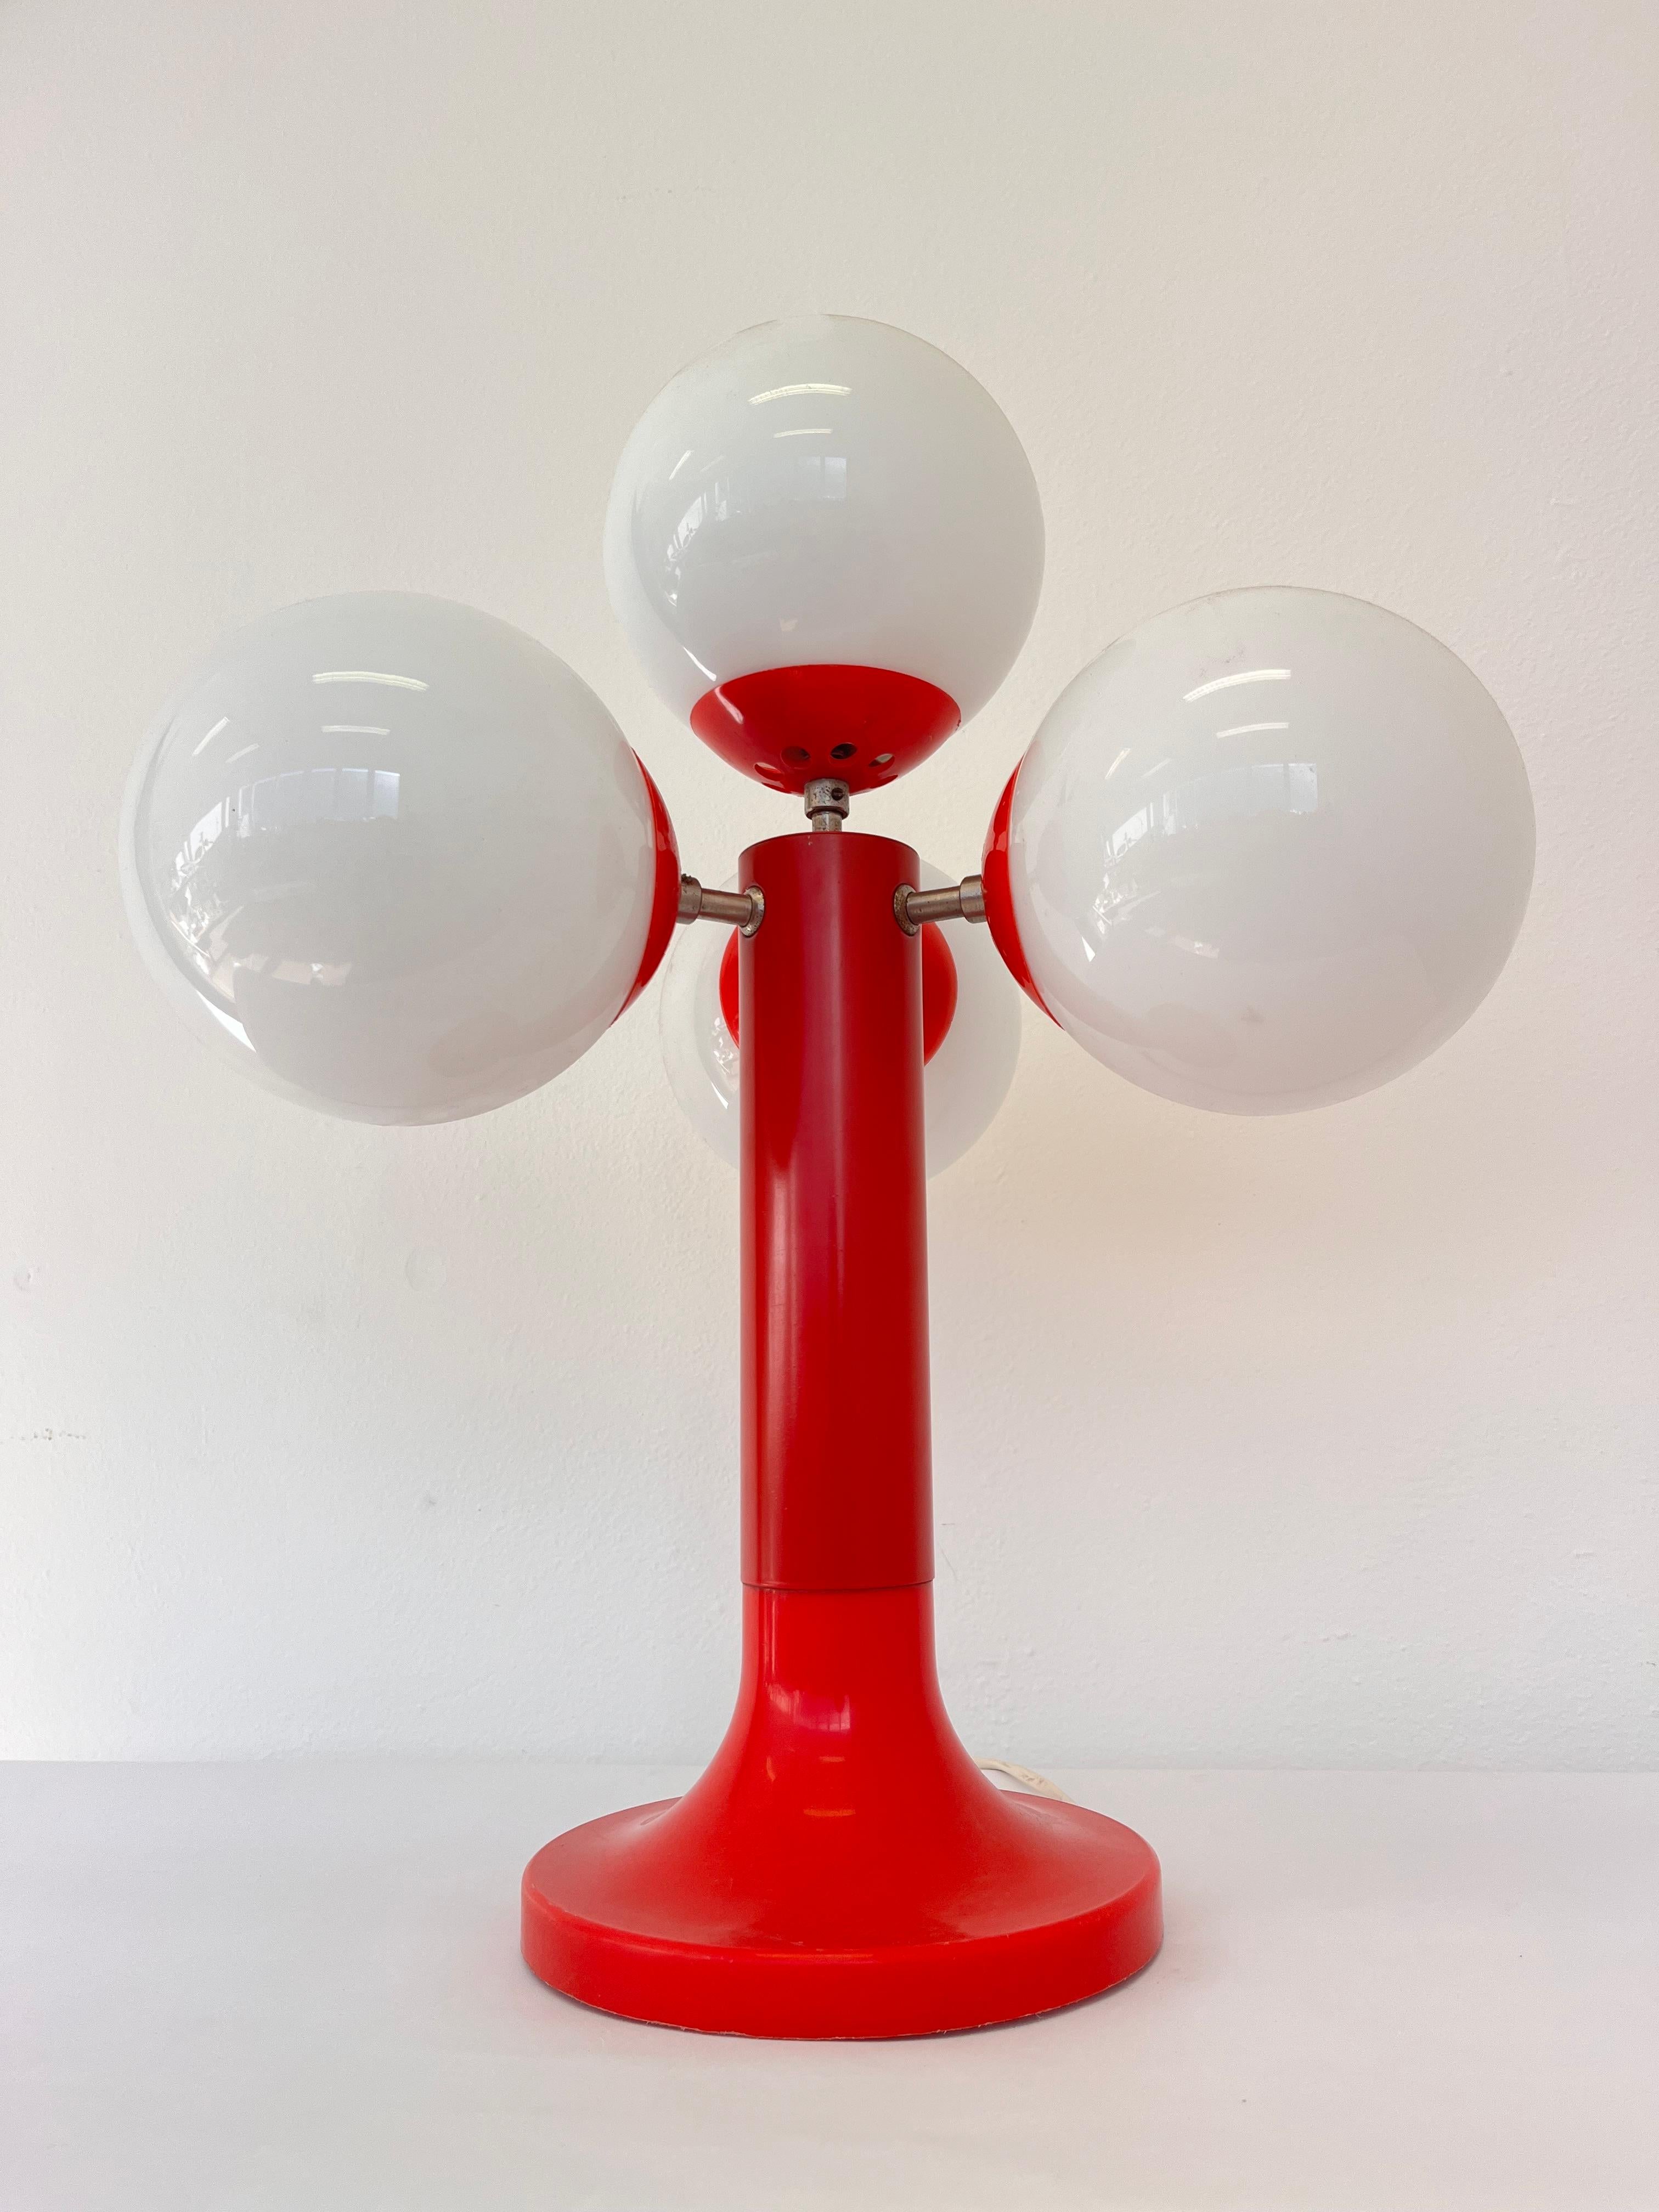 XL Midcentury Space Age Table Lamp, Sputnik or Atom, 1970s - Germany For Sale 2